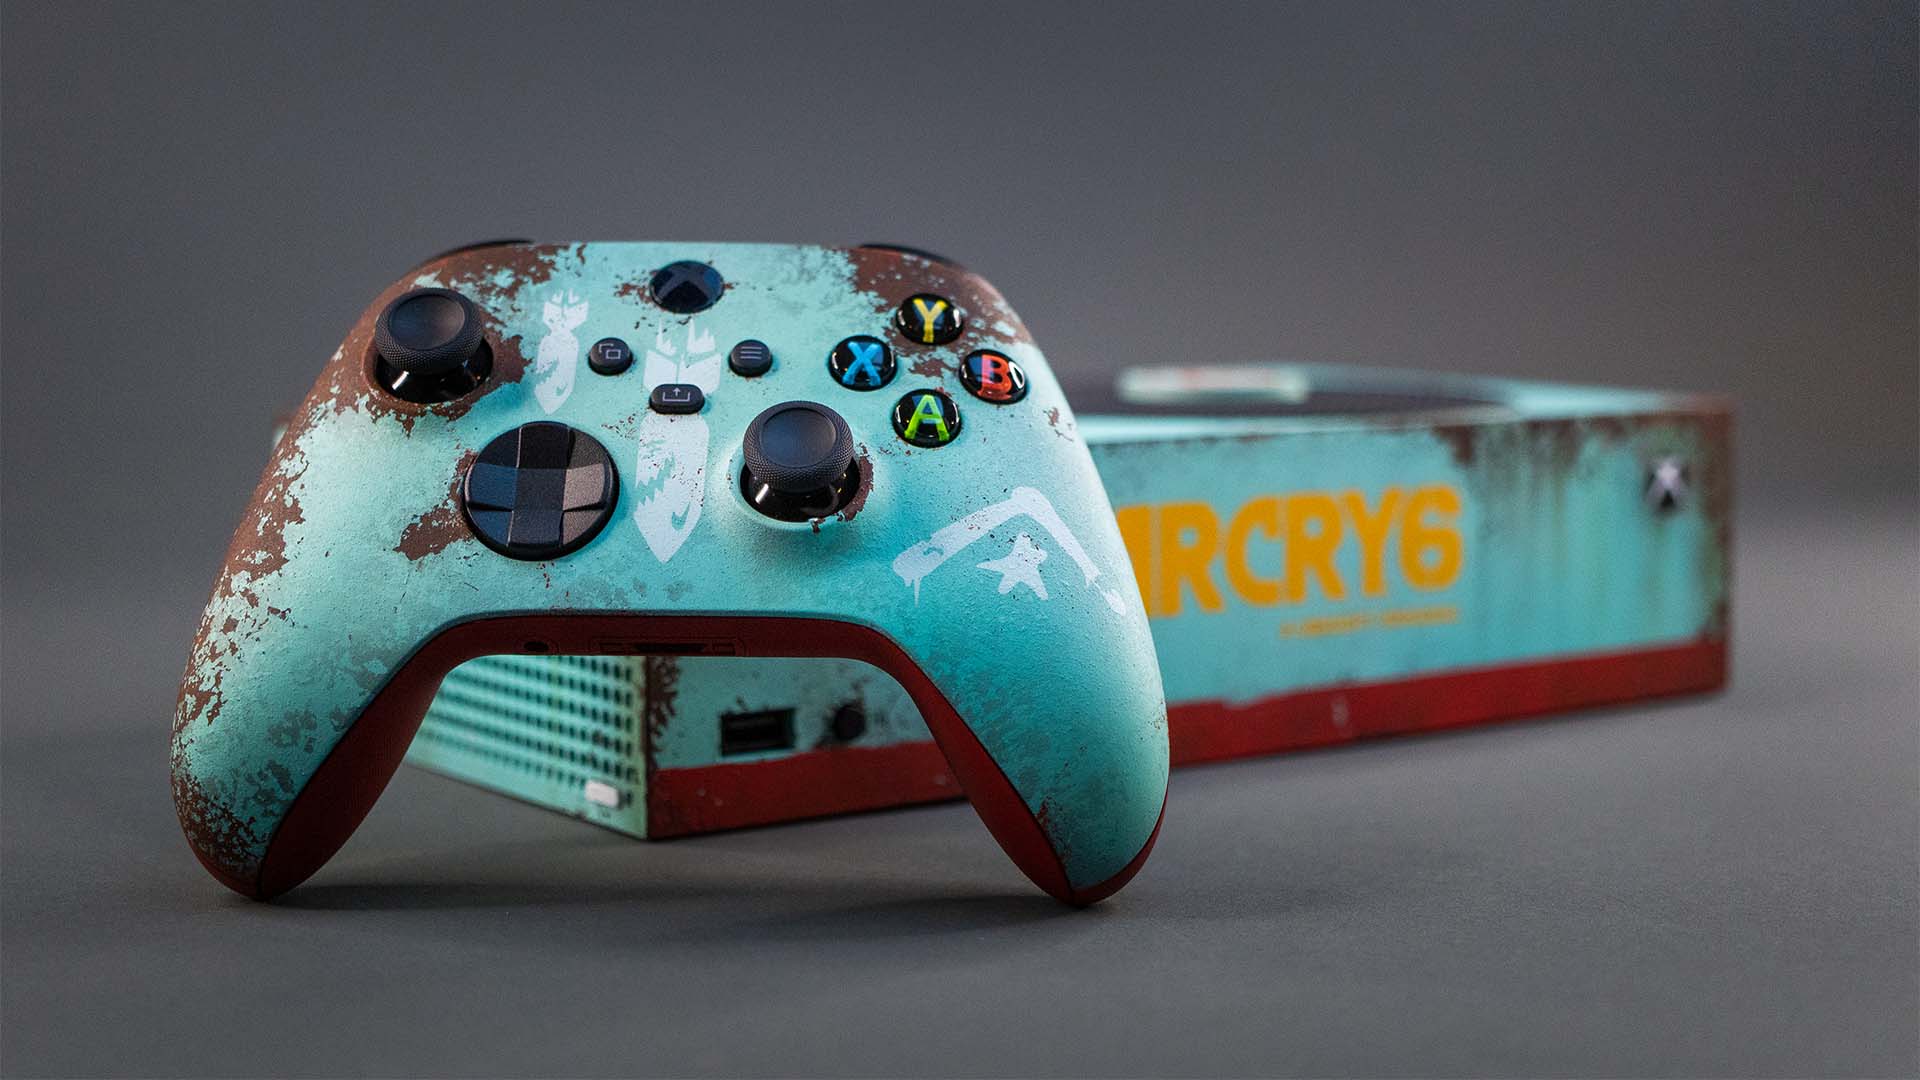 Microsoft is offering the chance to win this Far Cry 6-themed Xbox